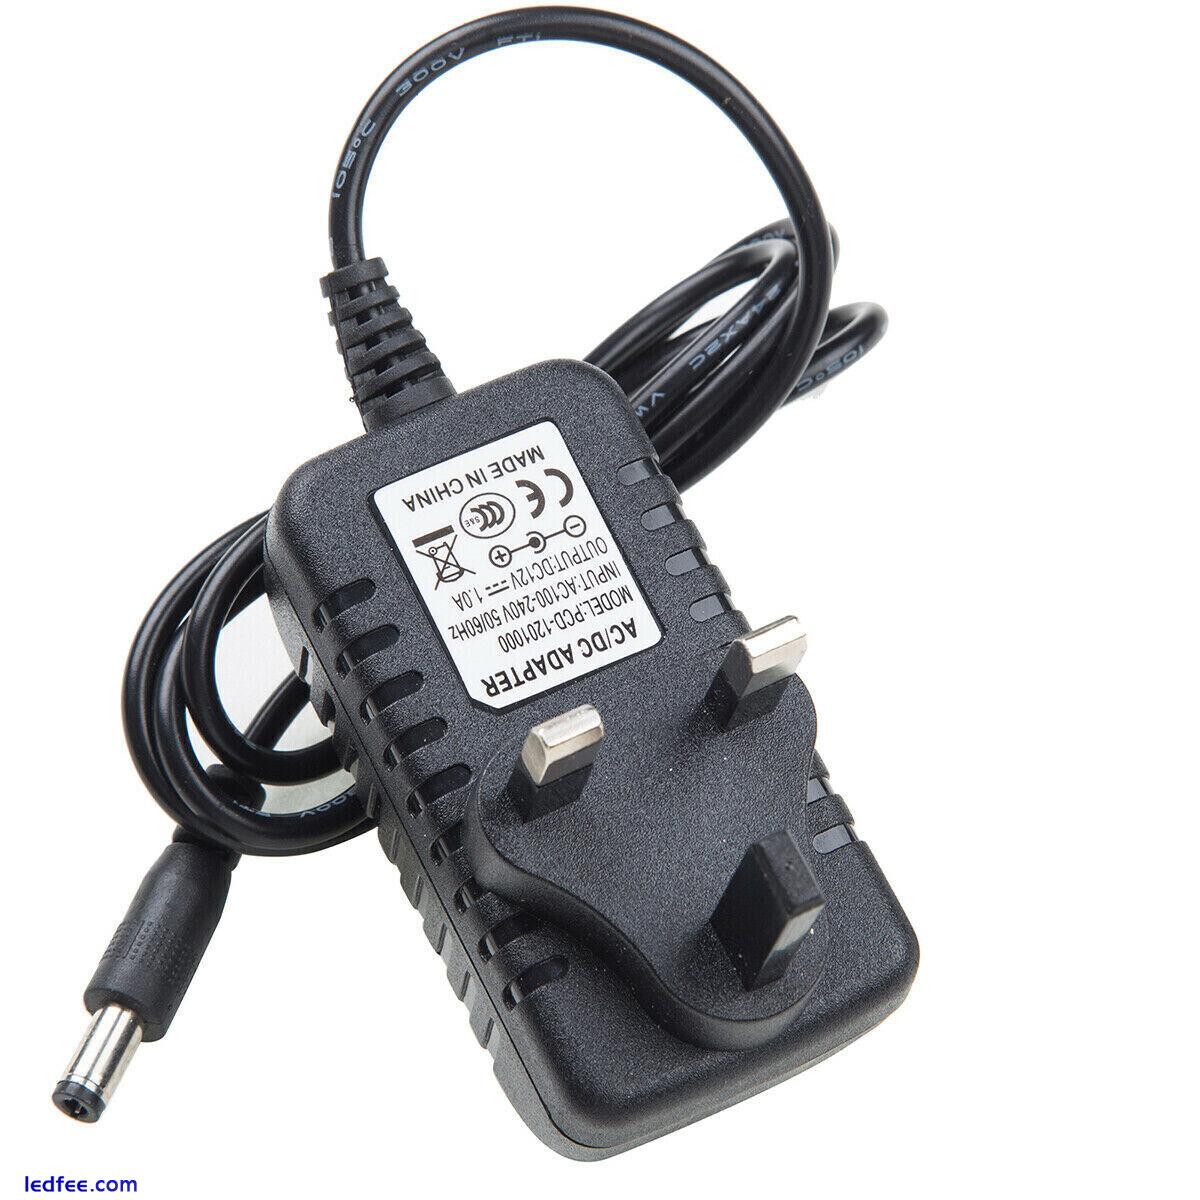 12V 1A 2A AC/DC UK Power Supply Adapter Safety Charger For LED Strip CCTV 0 